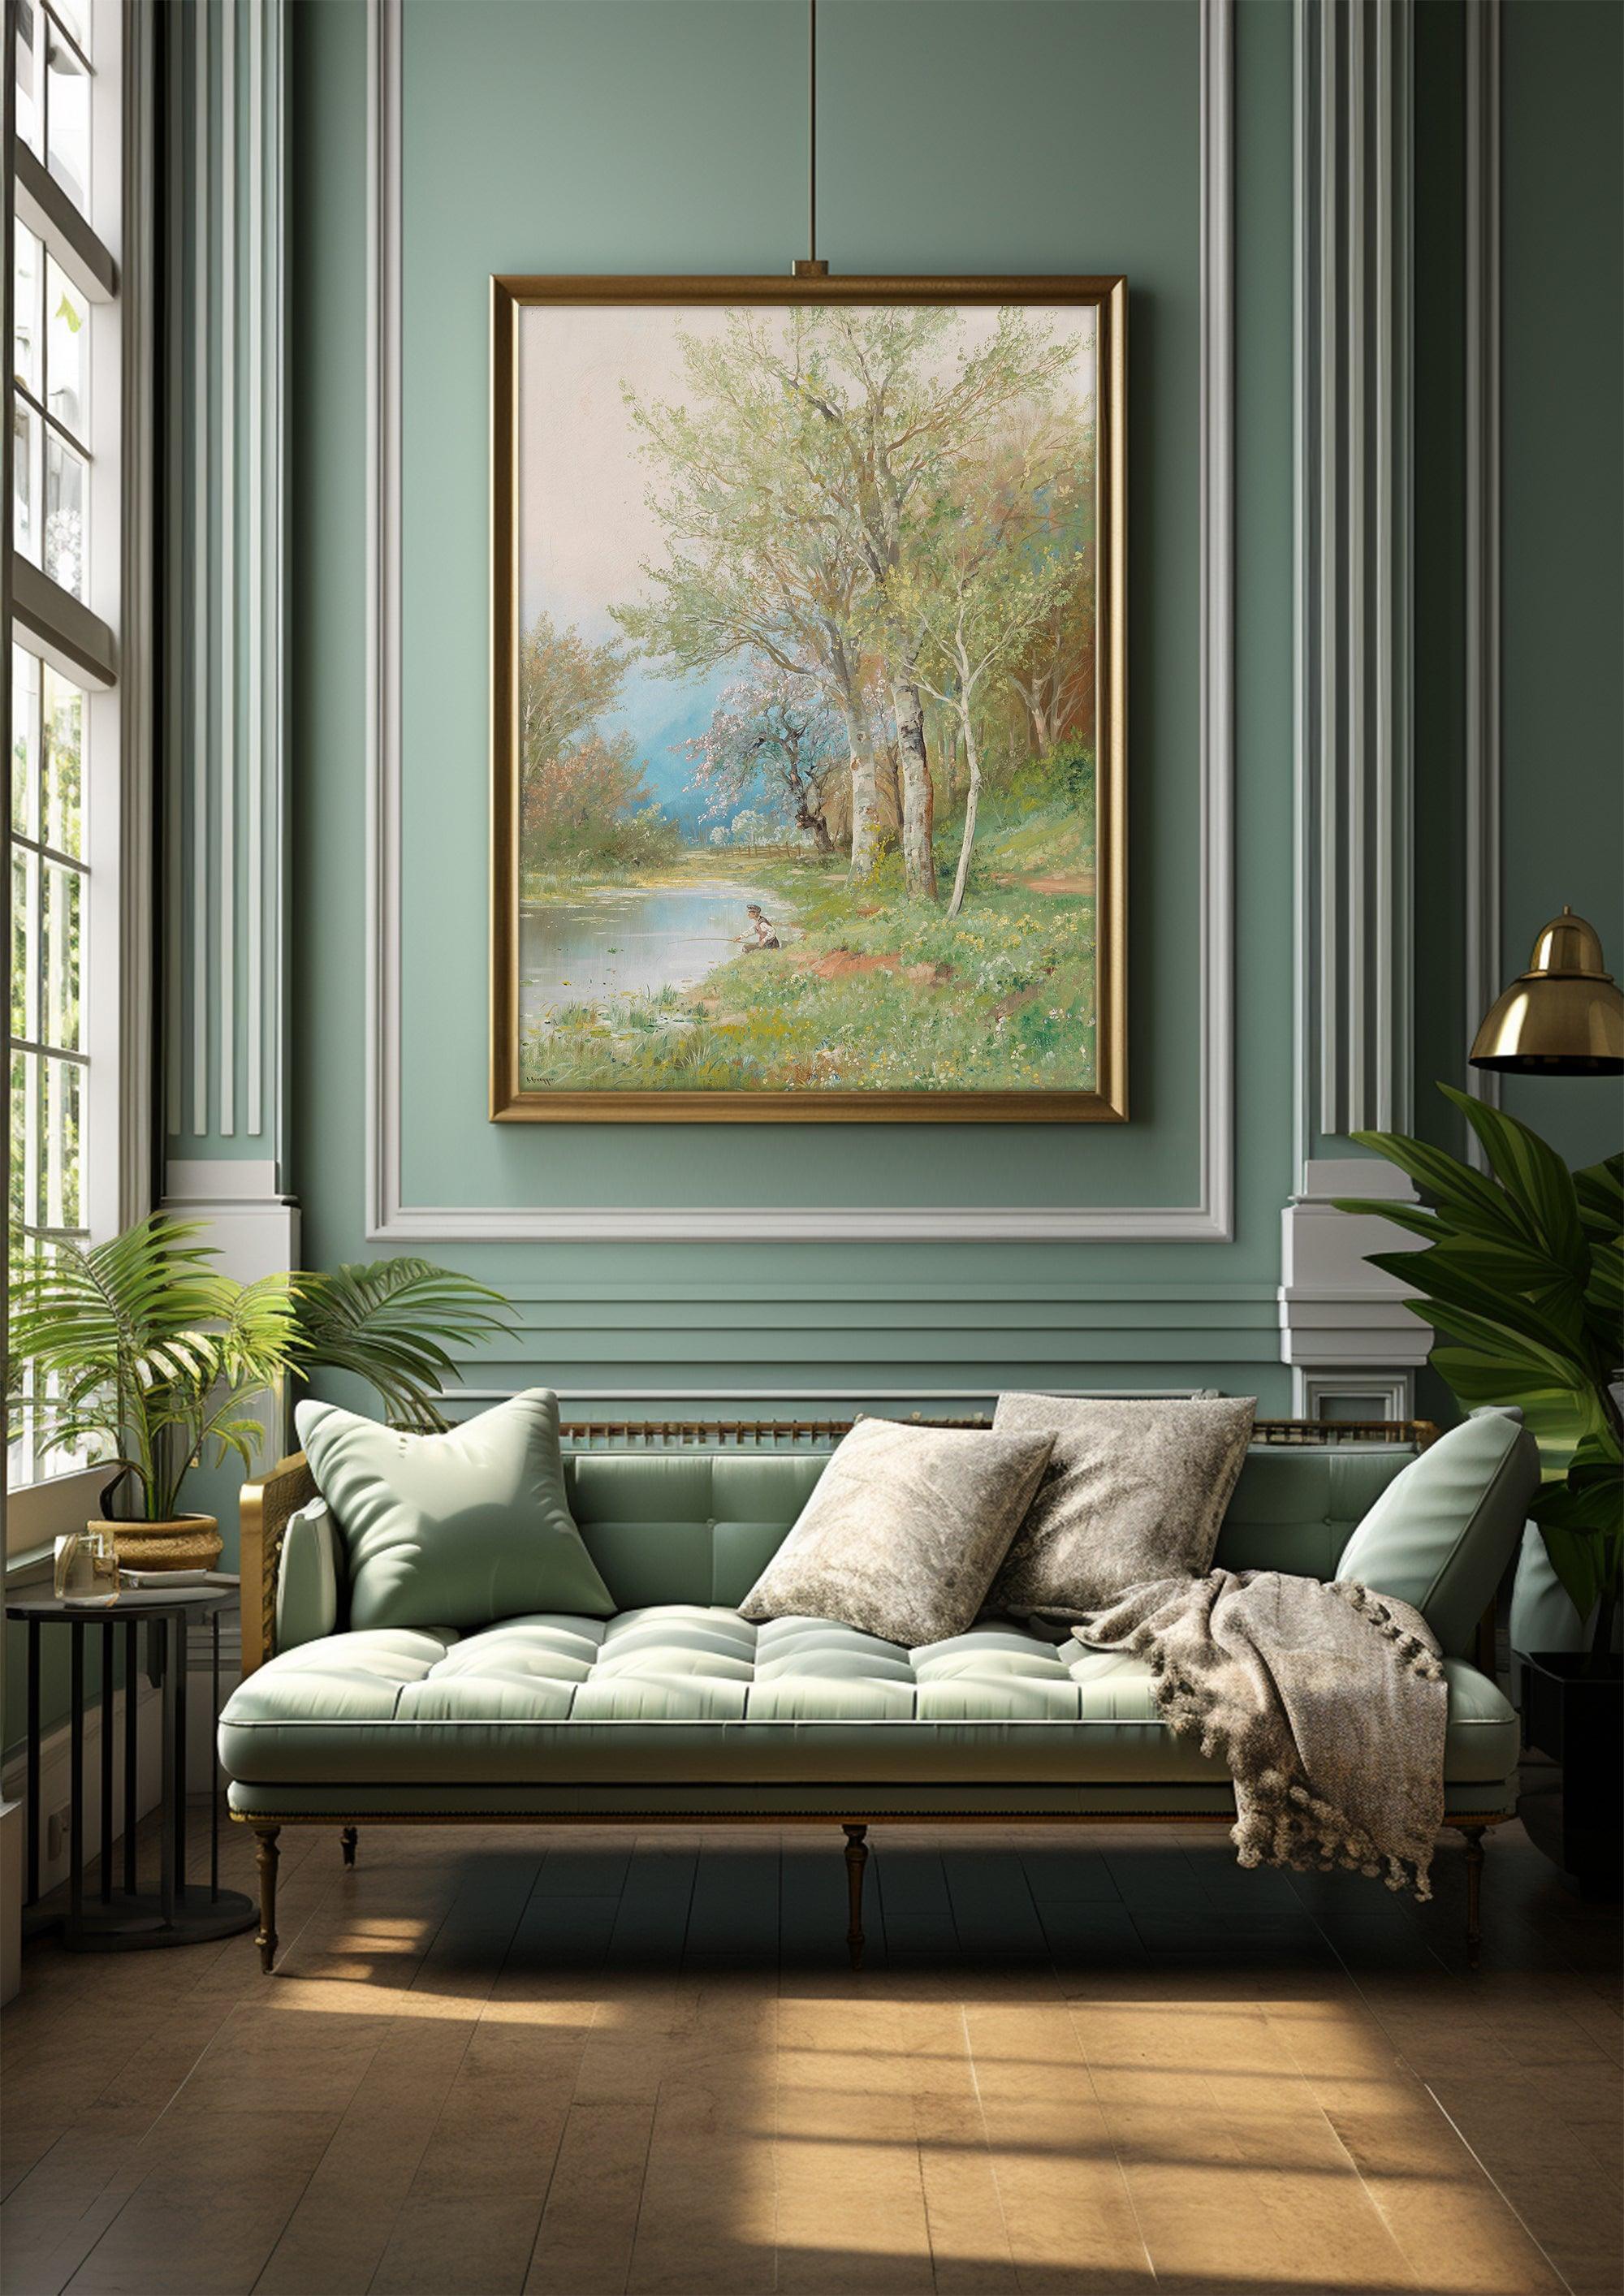 World Famous Landscape Canvas Prints - A Panorama of Elegance for Your Home，Wood Framed Canvas Prints